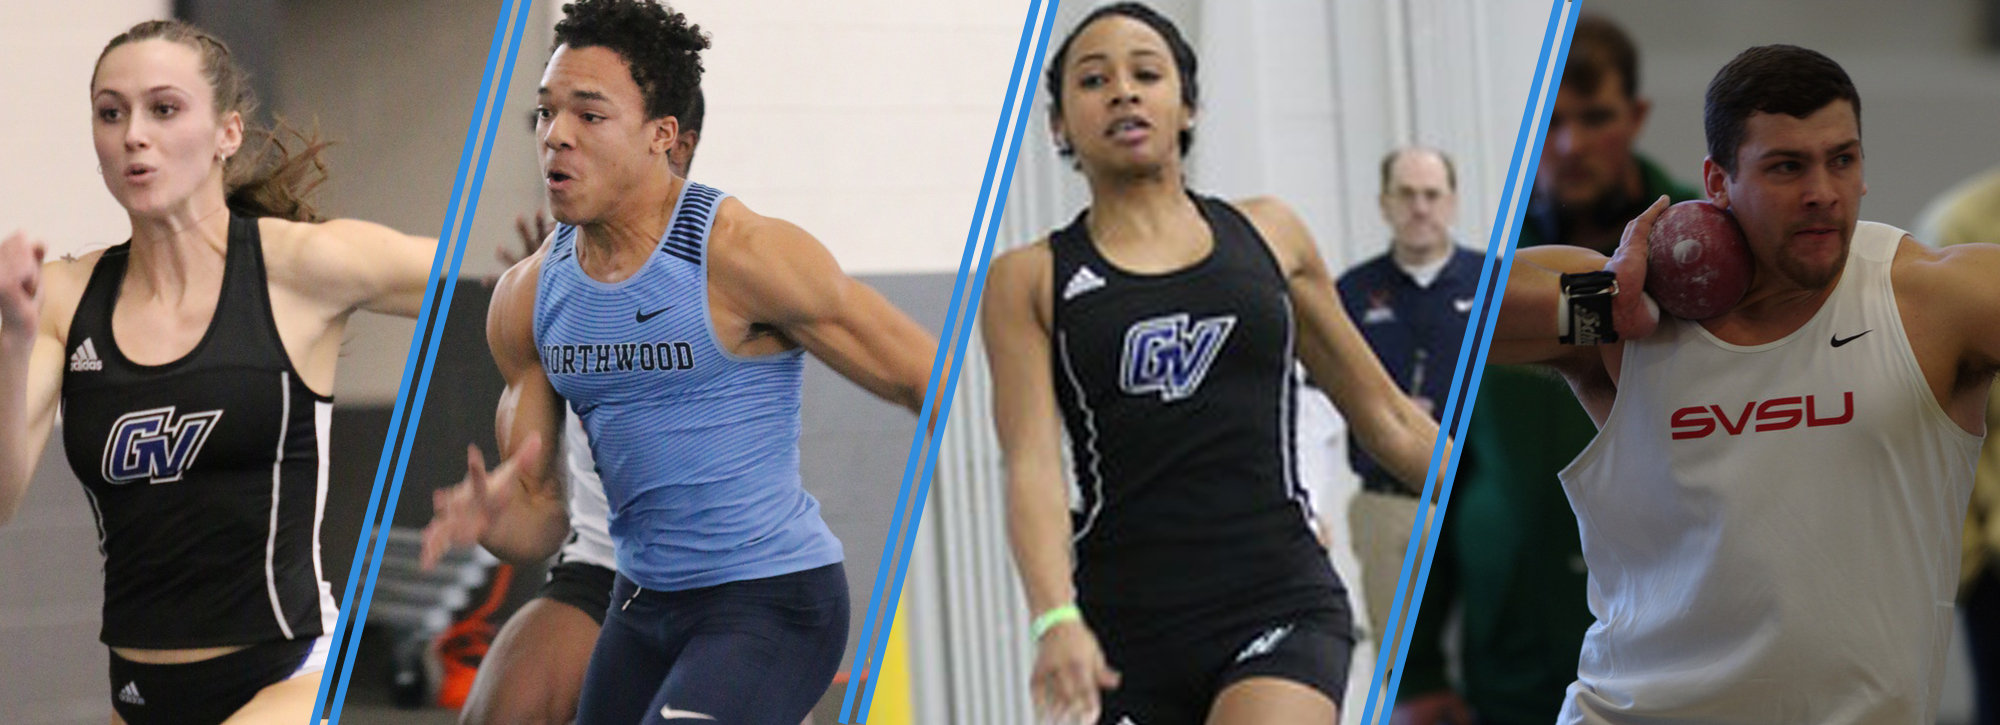 GVSU's Sreenan and Duncan sweep women's awards, while NU's Phillips and SVSU's Kelly take men's Week 3 track and field honors